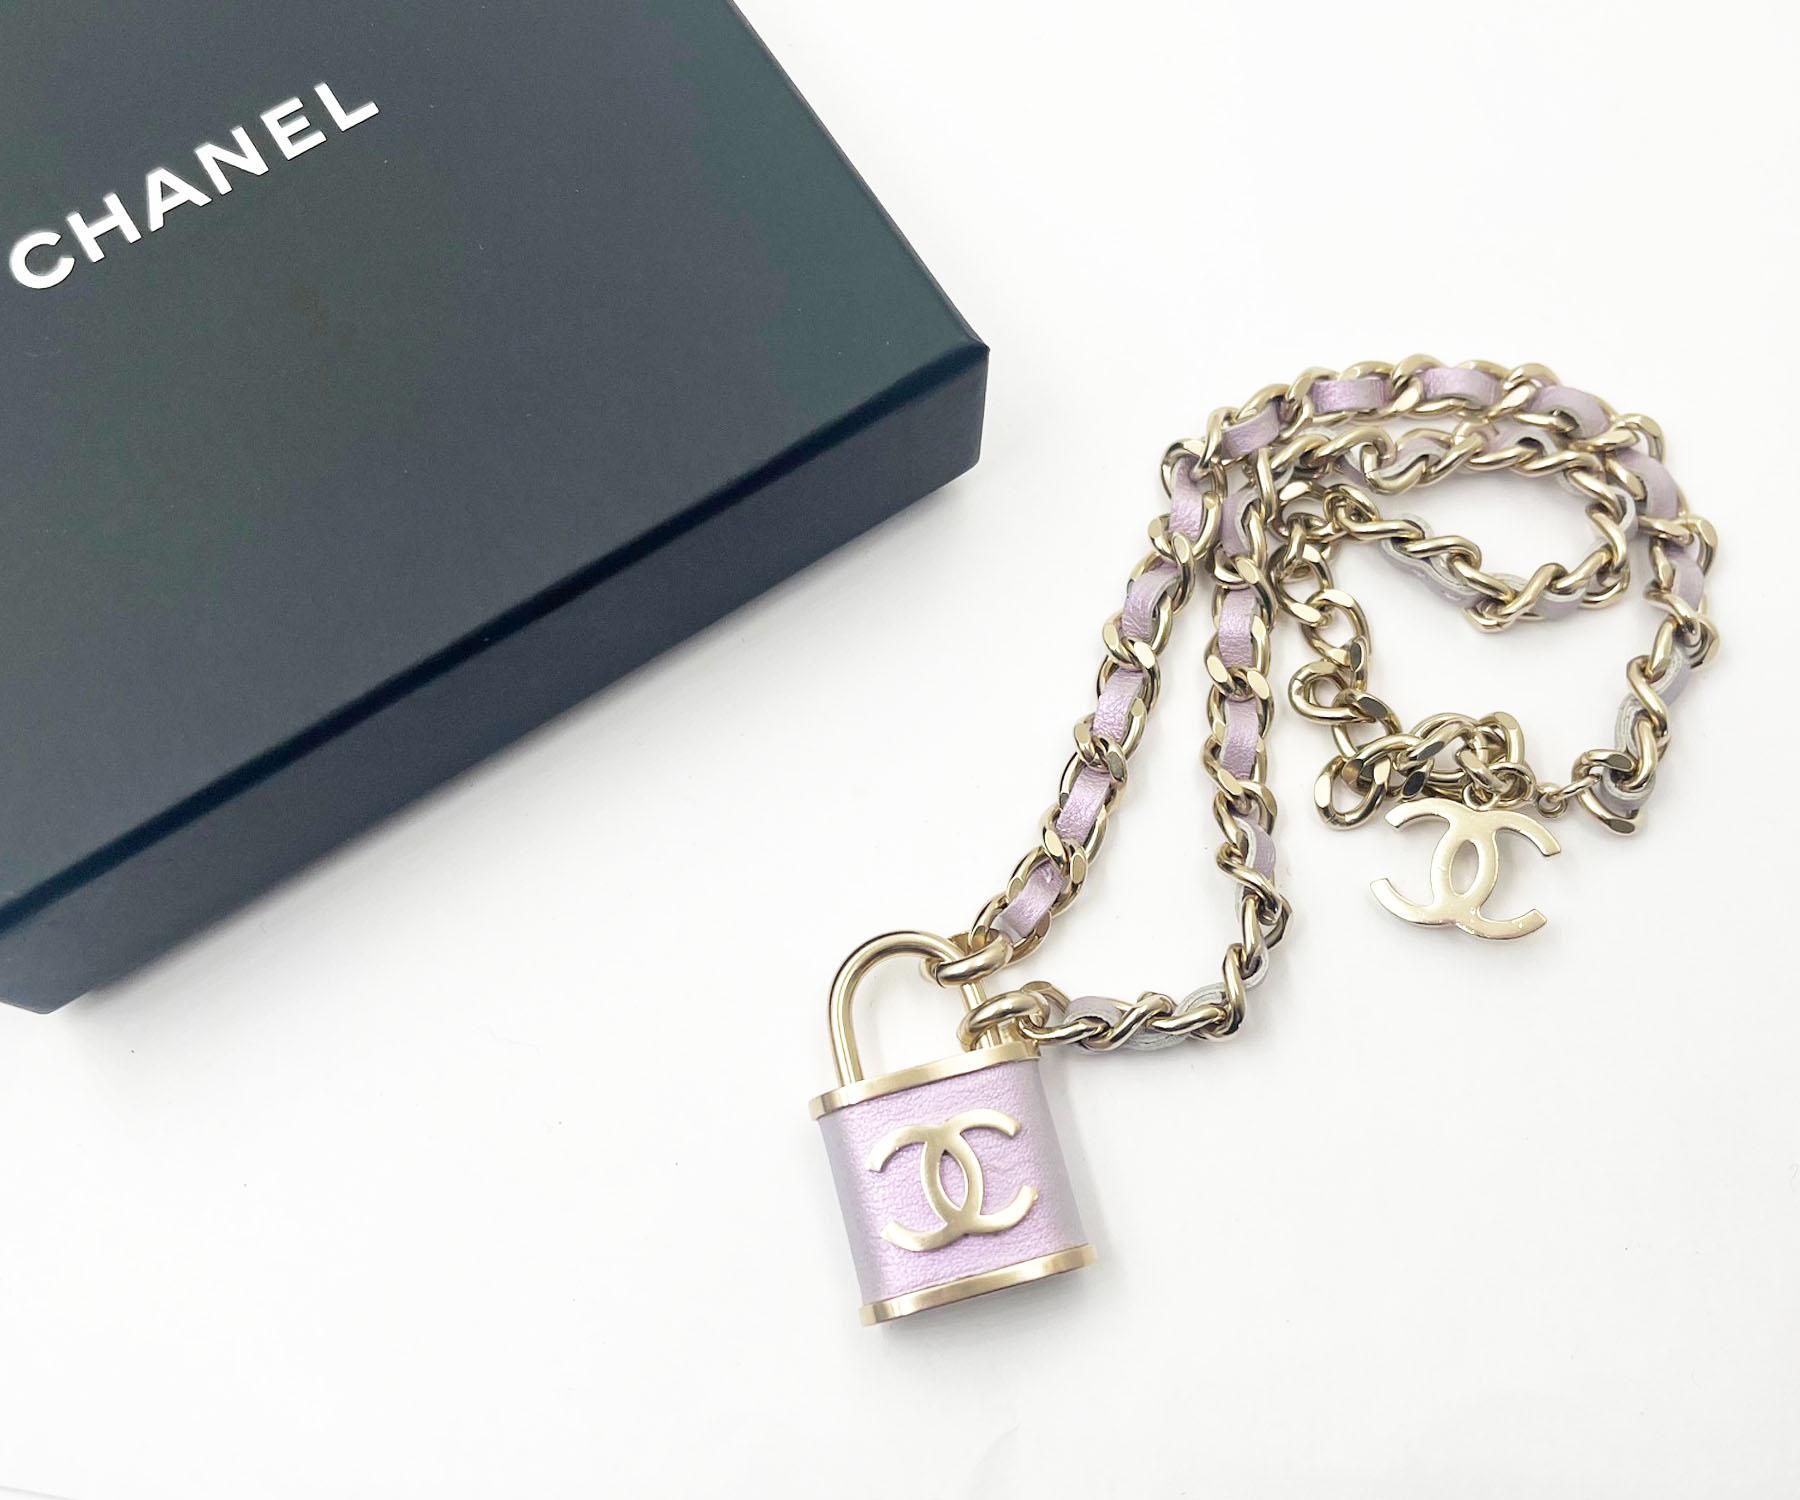 Chanel Light Gold CC Lavender Lock Pendant Necklace 

*Marked 18
*Made in Italy
*Comes with the original box and pouch

-The  length is about 17